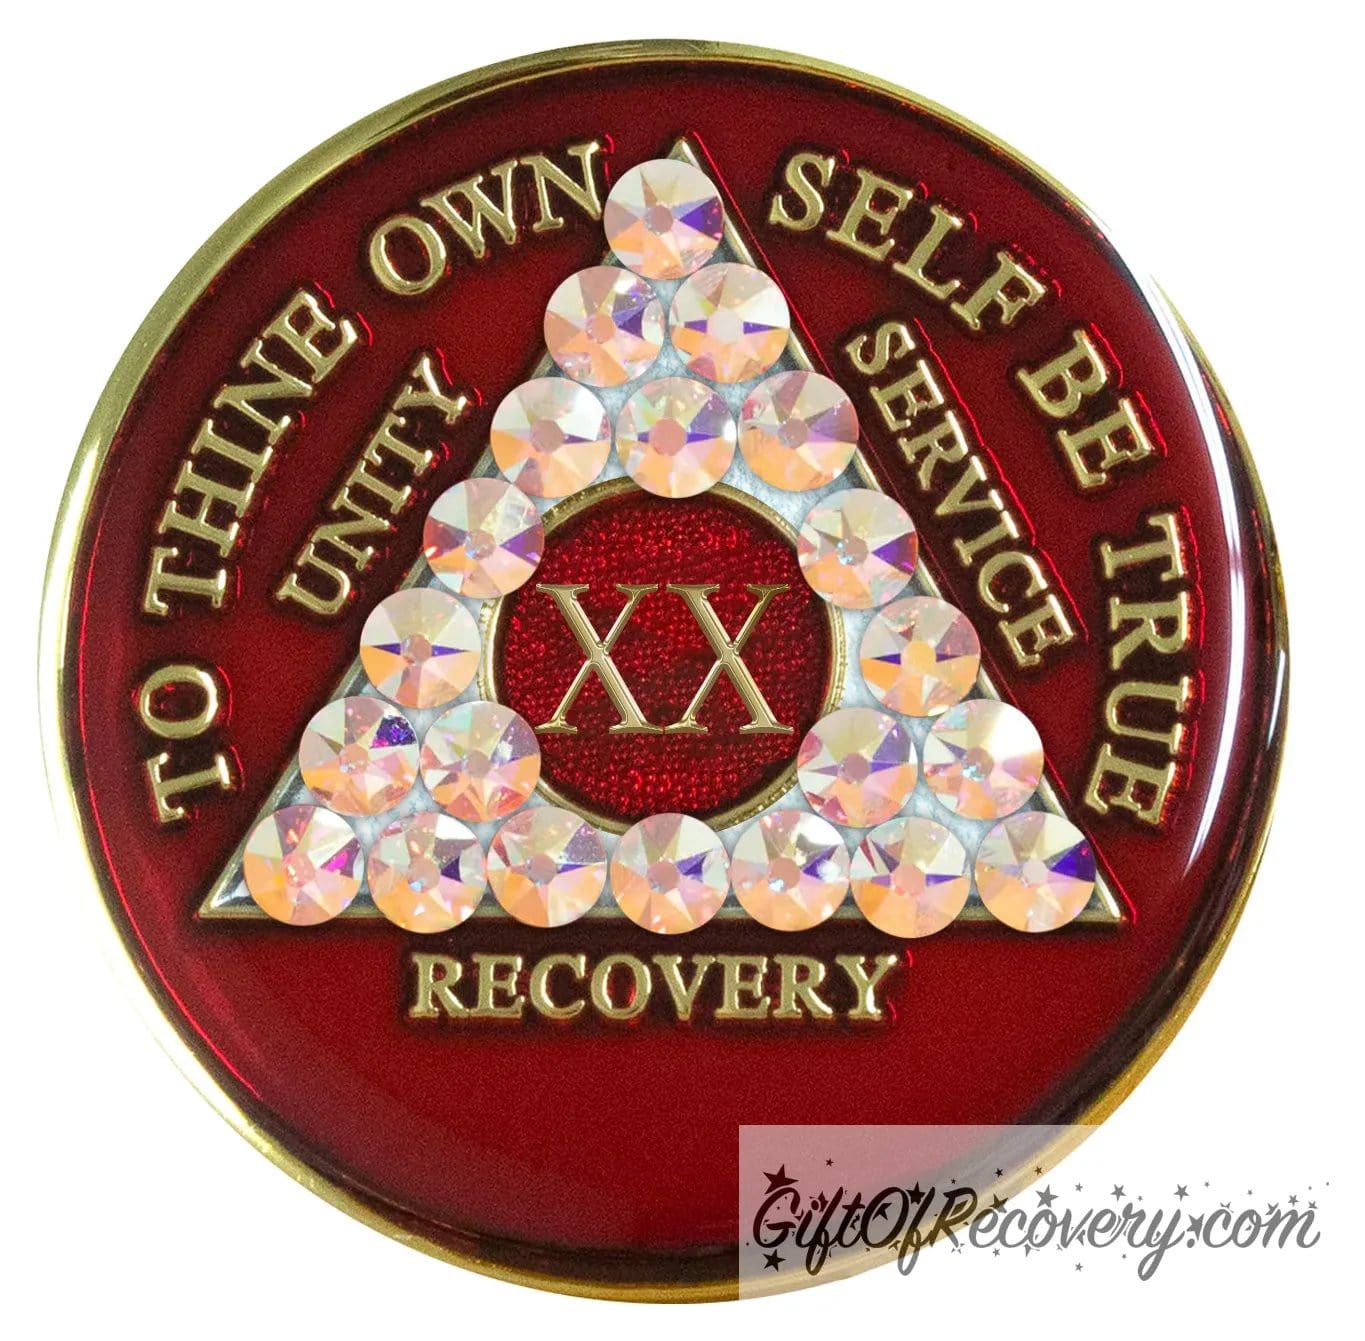 20 year AA medallion ruby red with 21 Aurora Borealis genuine crystals in the shape of the triangle and to thine own self be true, unity, service, recovery, and roman numeral are embossed with 14k gold-plated brass, the medallion is sealed with resin for a shiny finish that lasts.